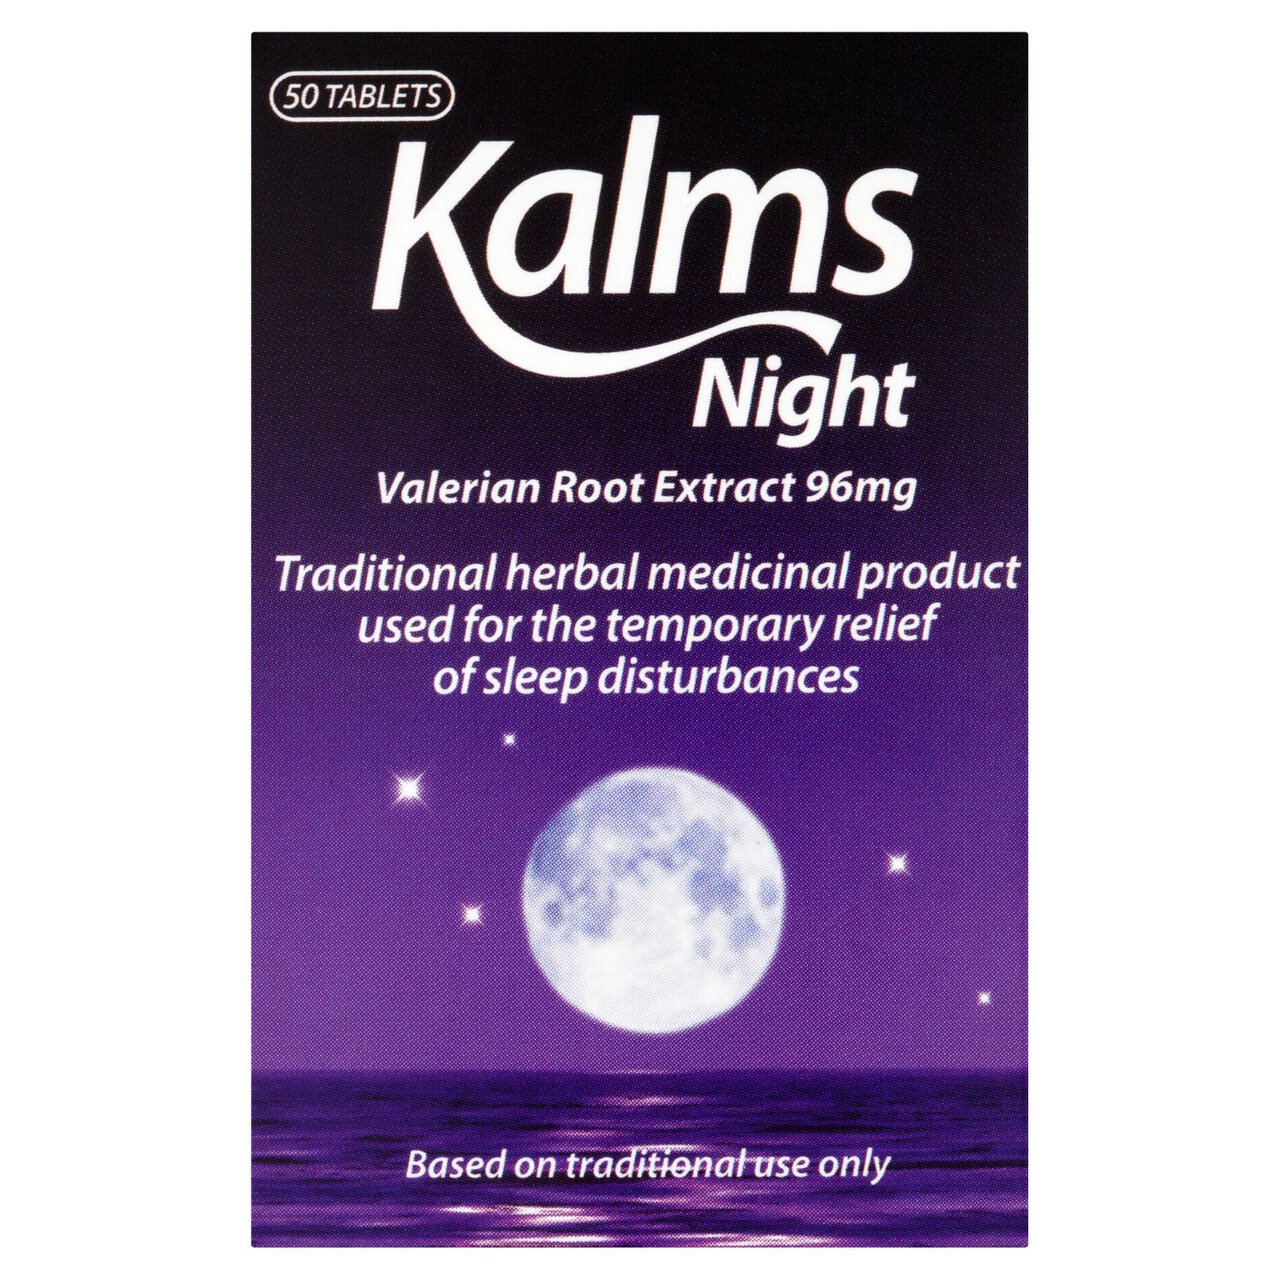 Kalms Night 96mg Valerian Root Extract Tablets 50 per pack